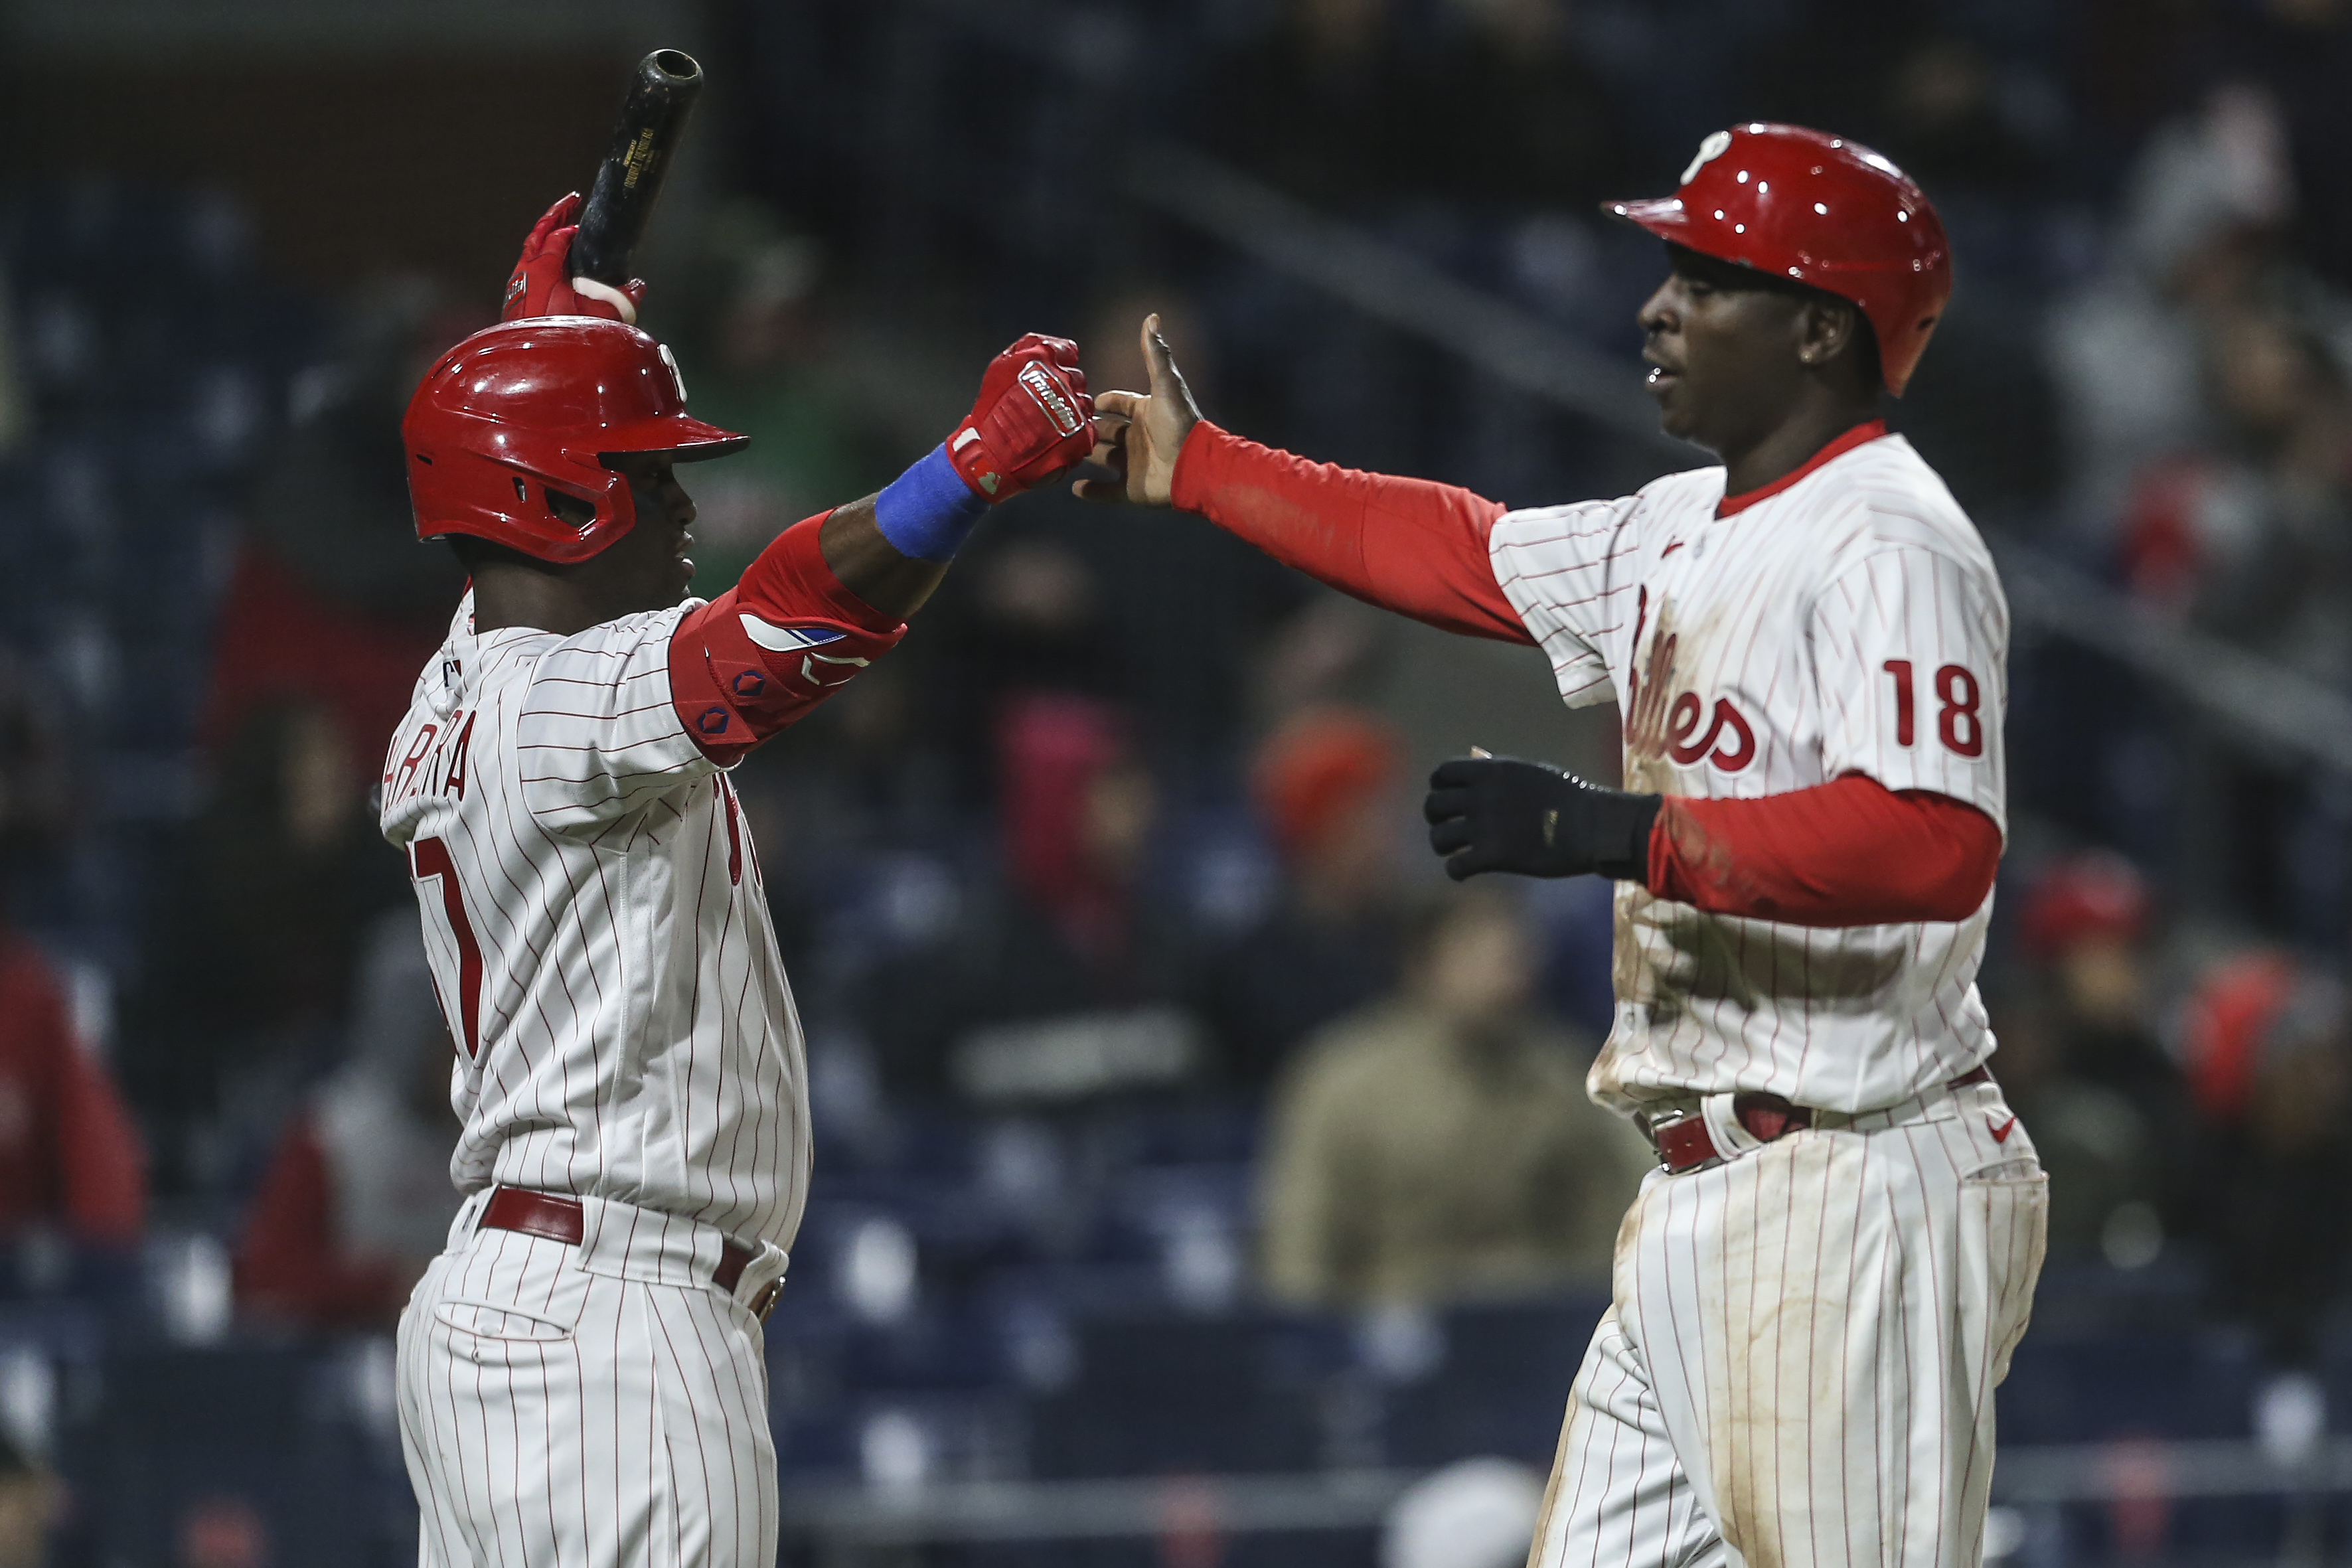 Should Phillies Fans Move On From Odubel Herrera Controversy? Bryce Harper  Gives Some Subtext